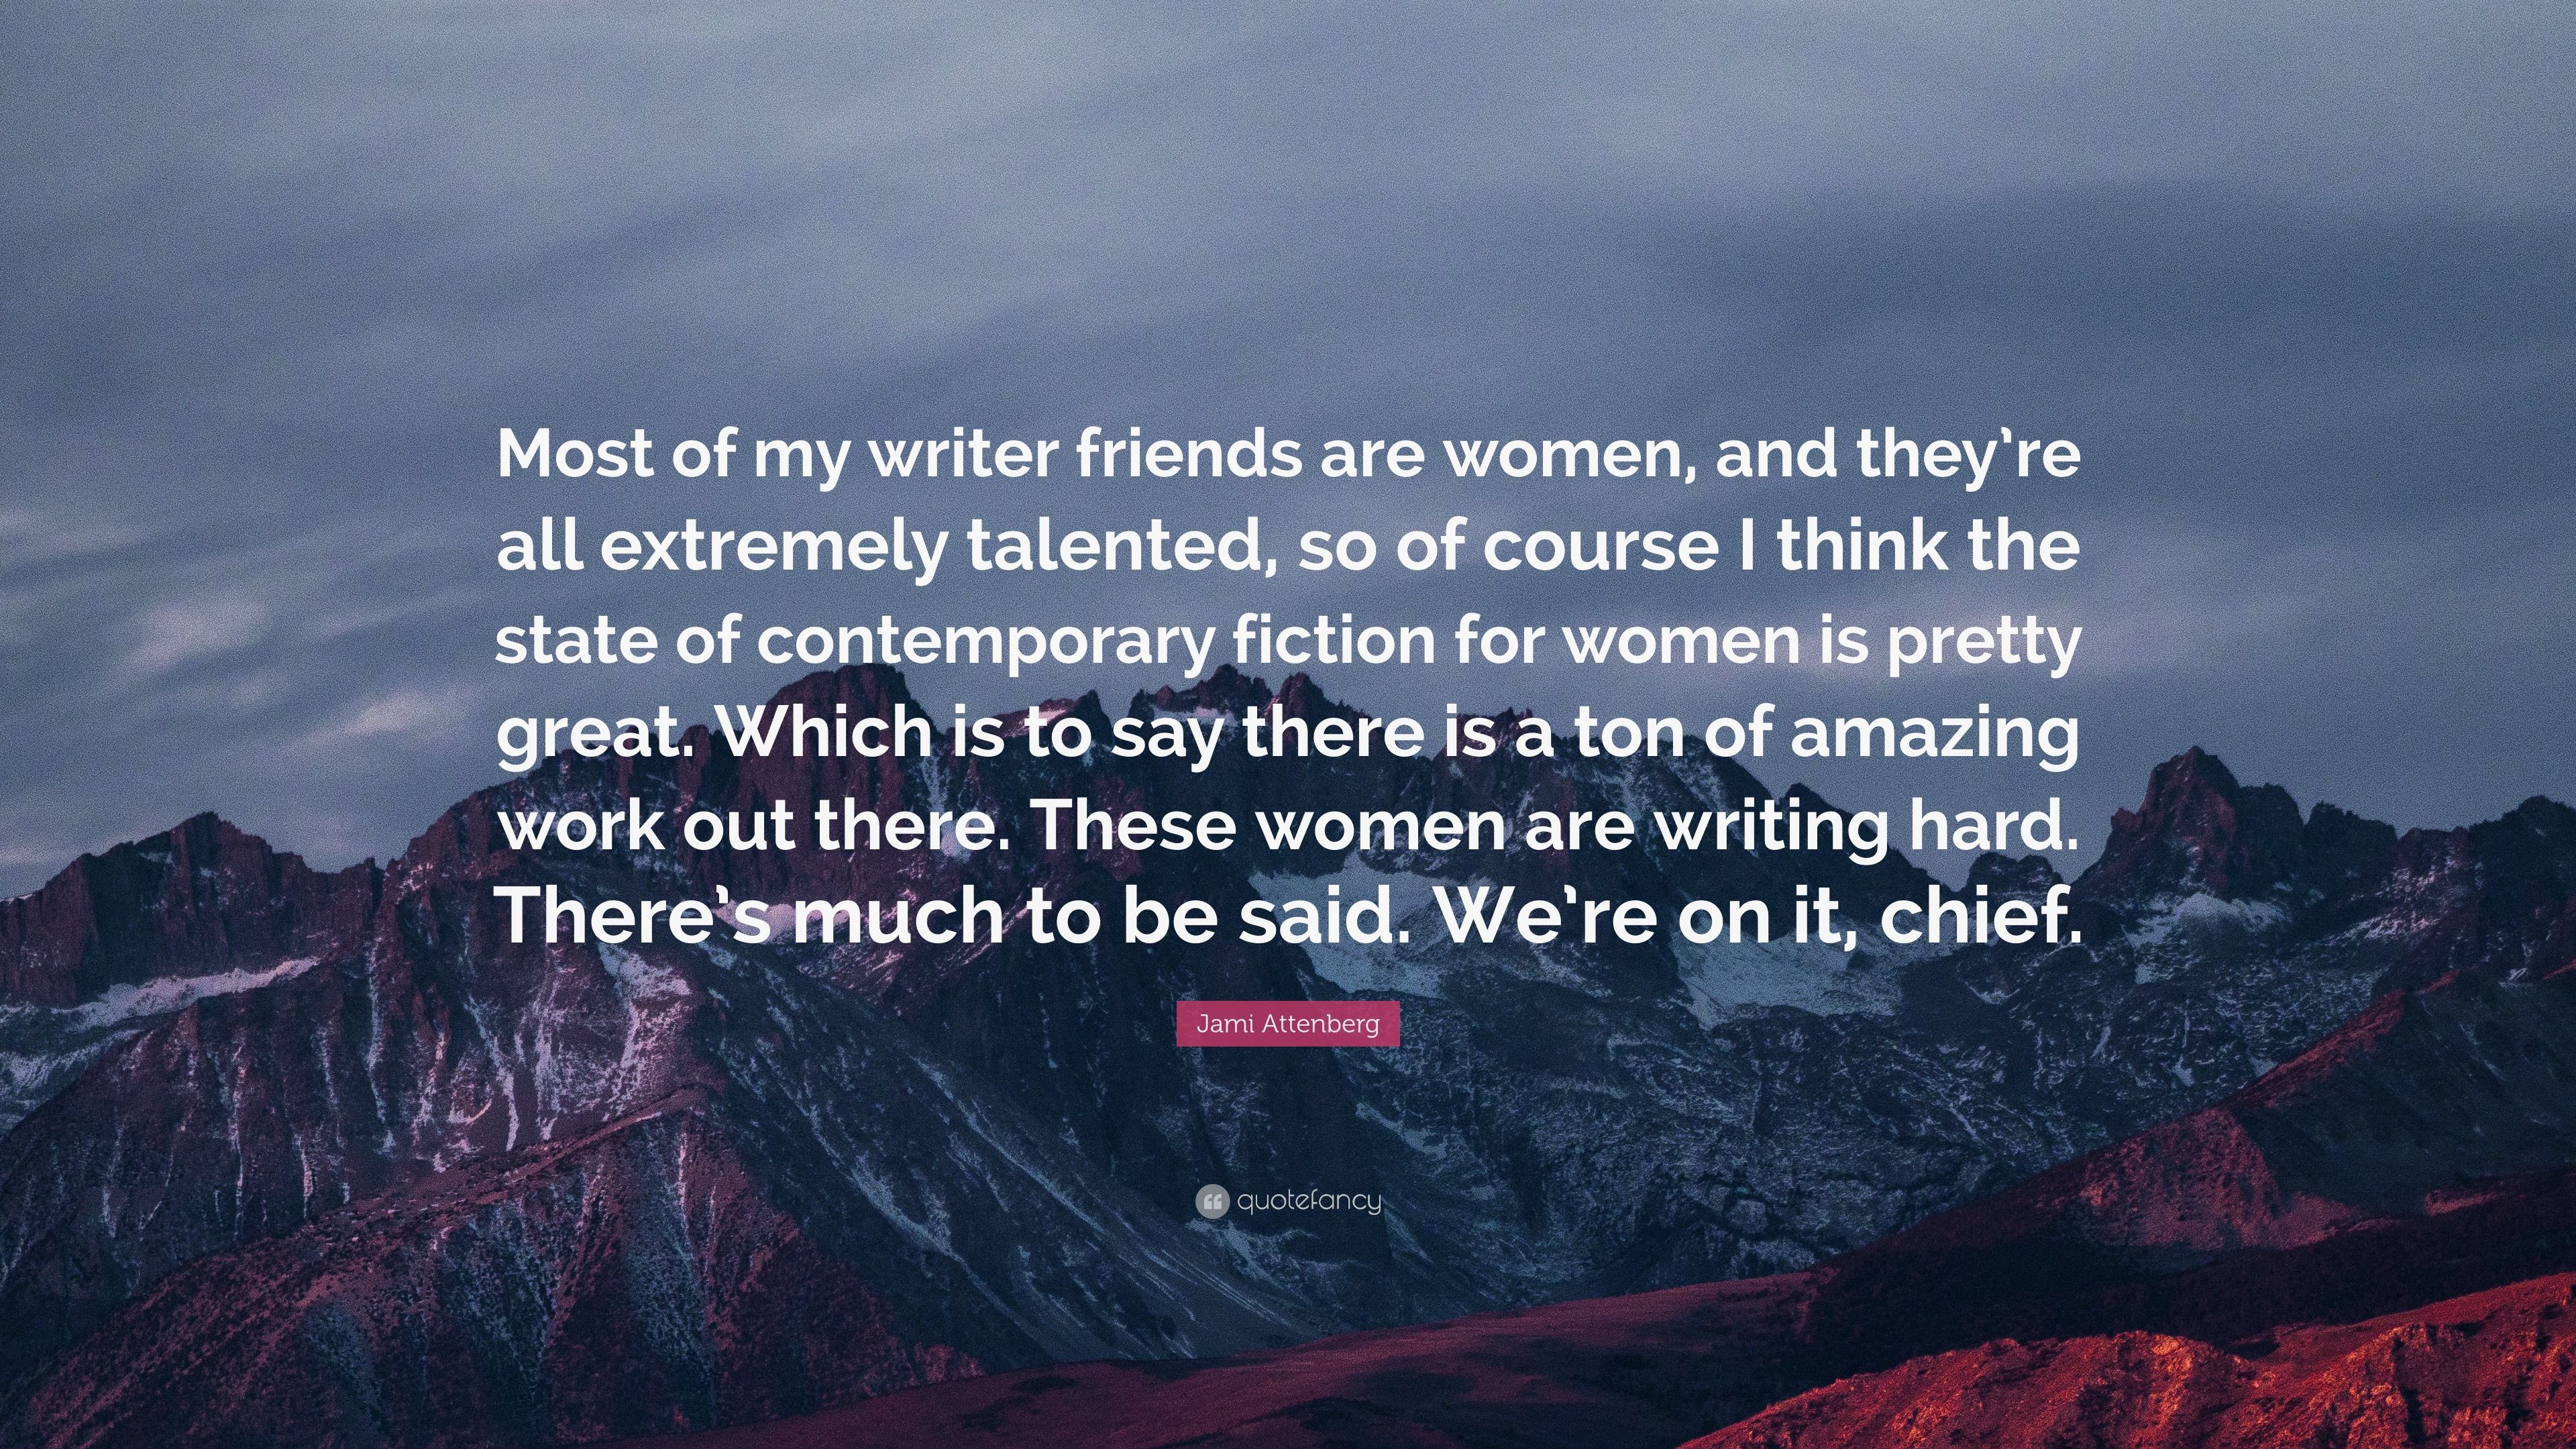 Jami Attenberg Quote: “Most of my writer friends are women